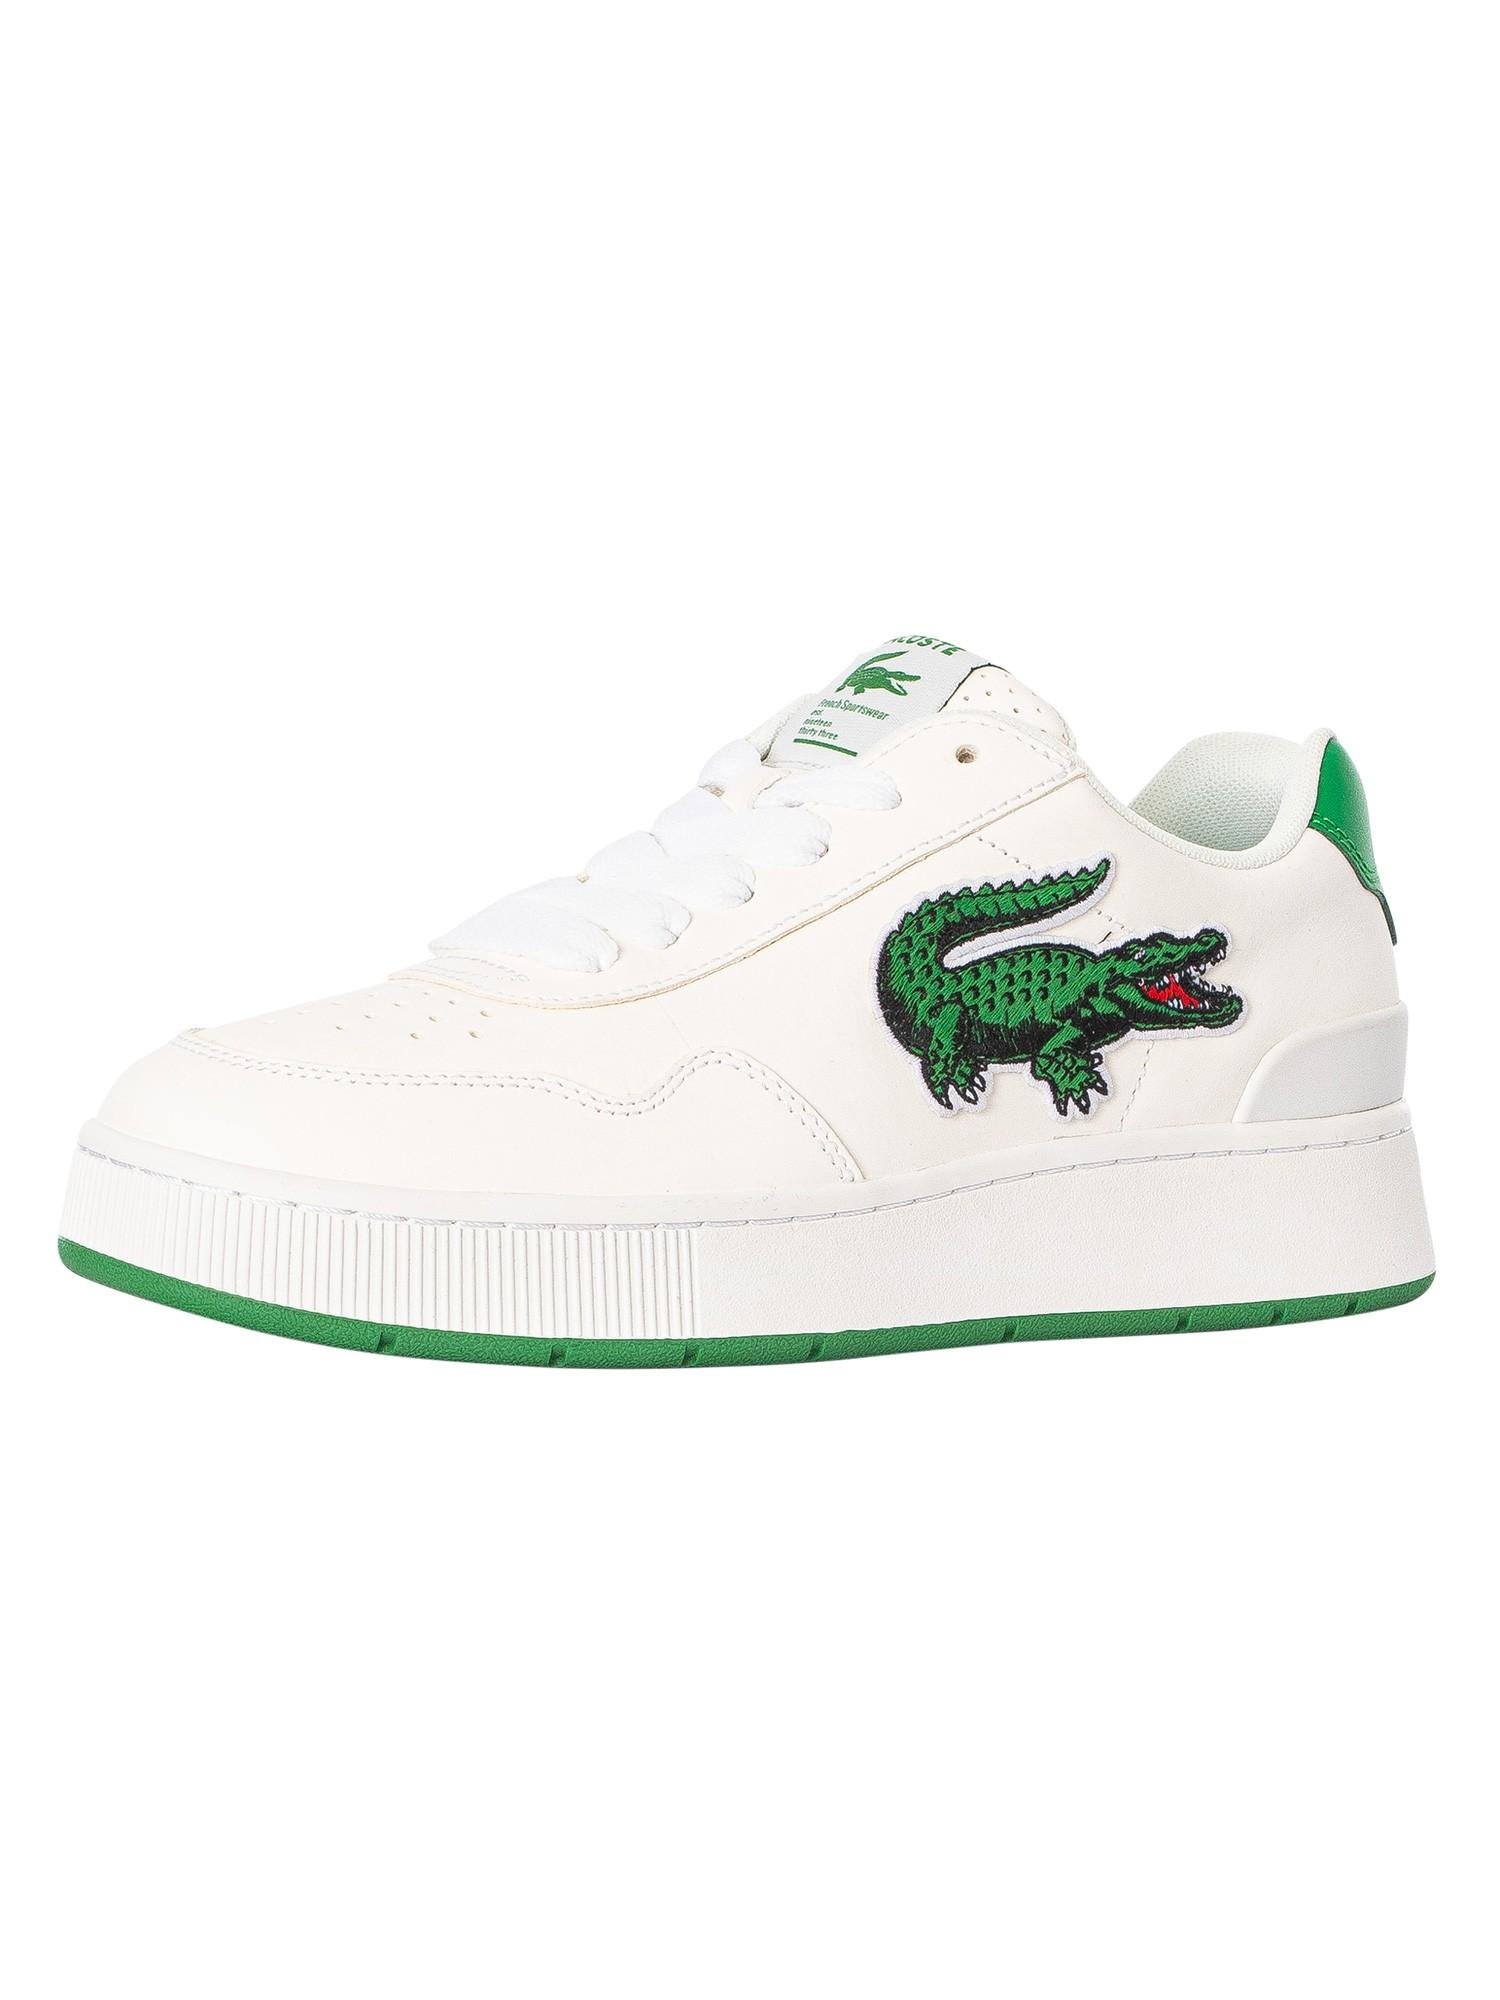 Lacoste Ace Clip 123 3 Sma Leather Trainers for Men | Lyst